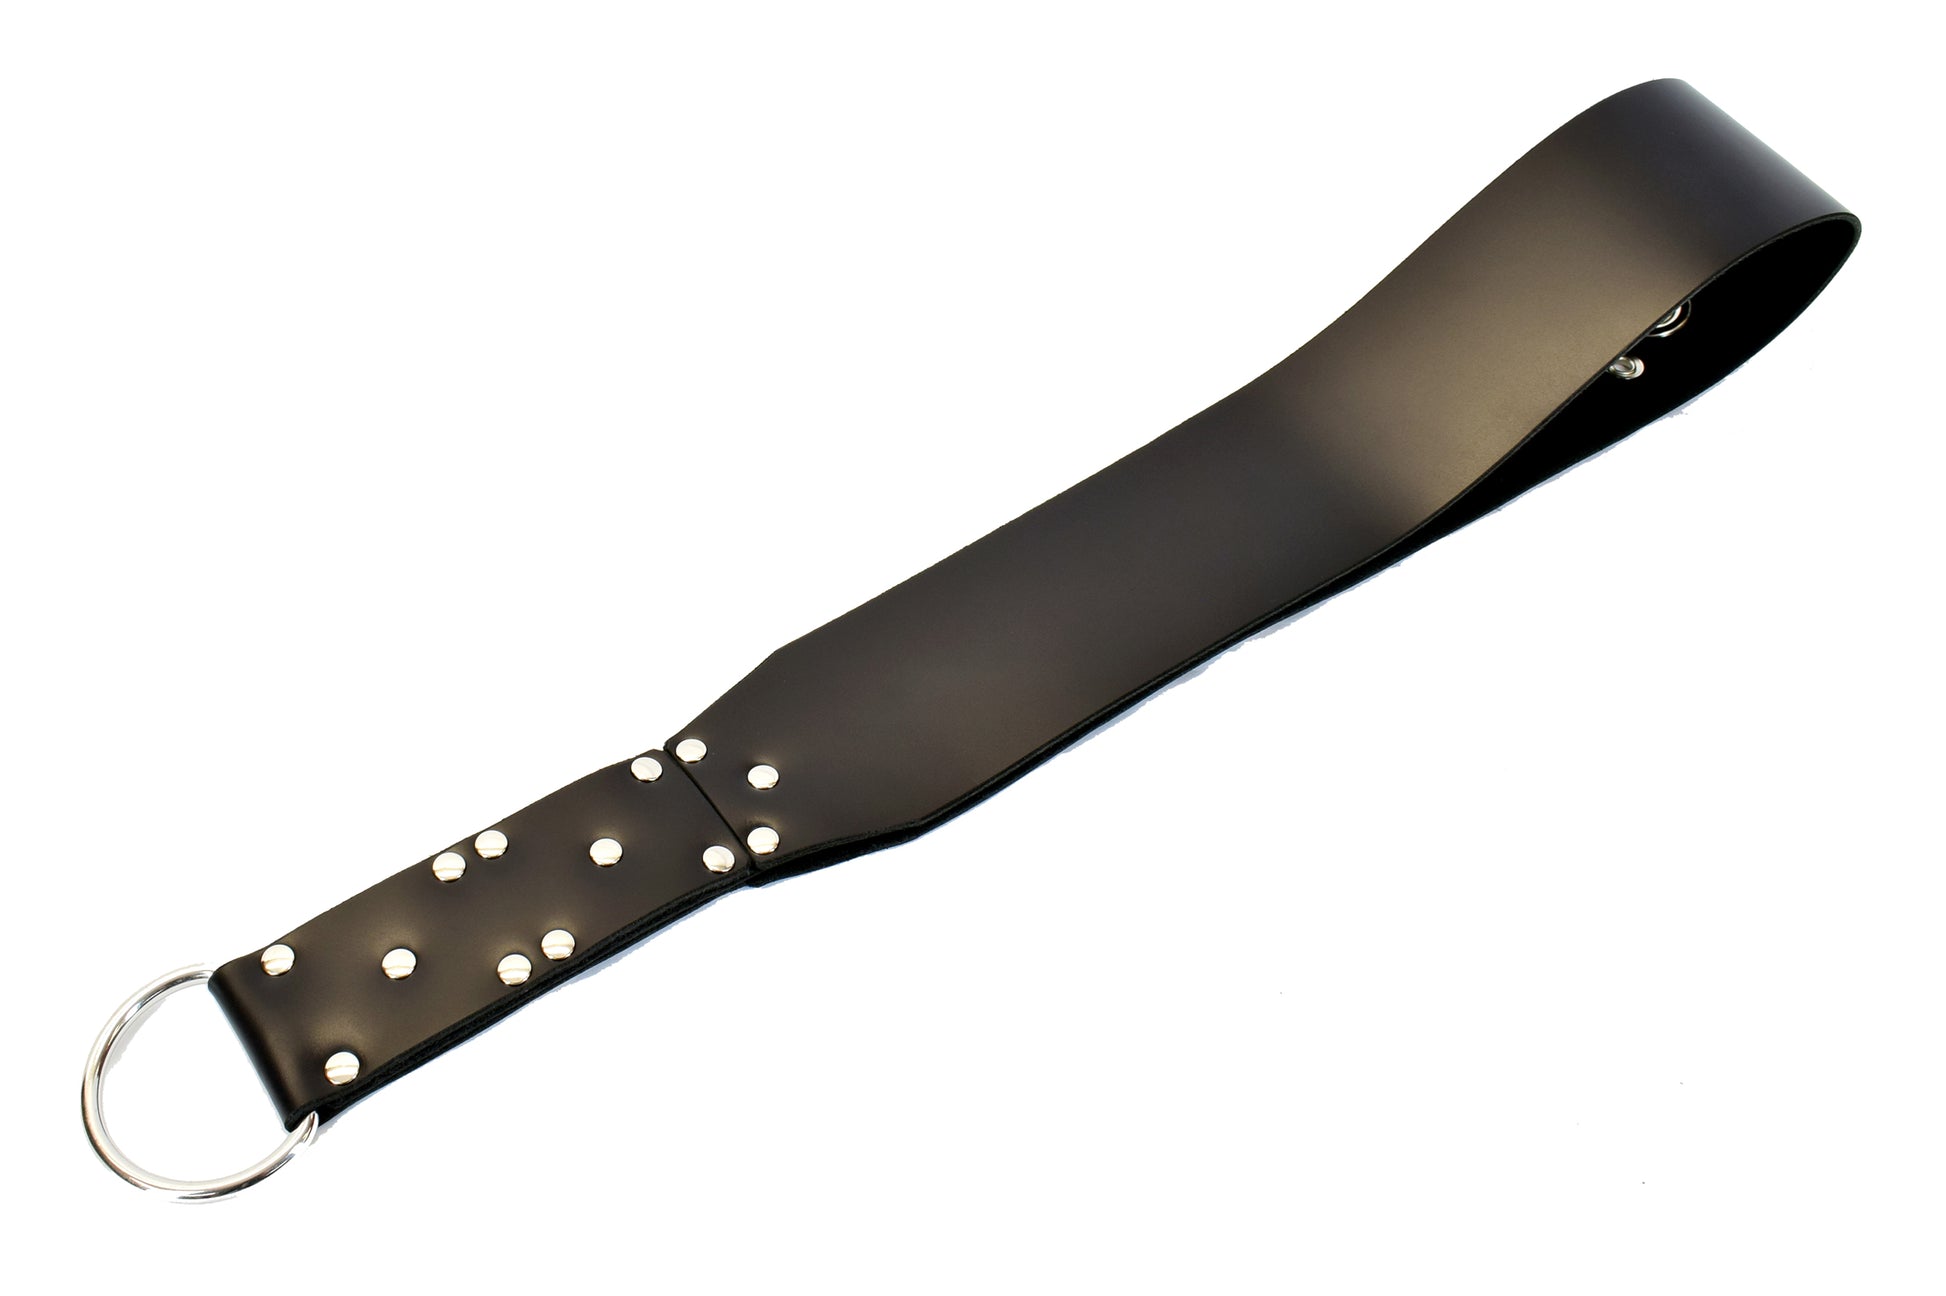 Black big leather slapper strap laid straight out on reverse side without tentacle detailing, against white background.